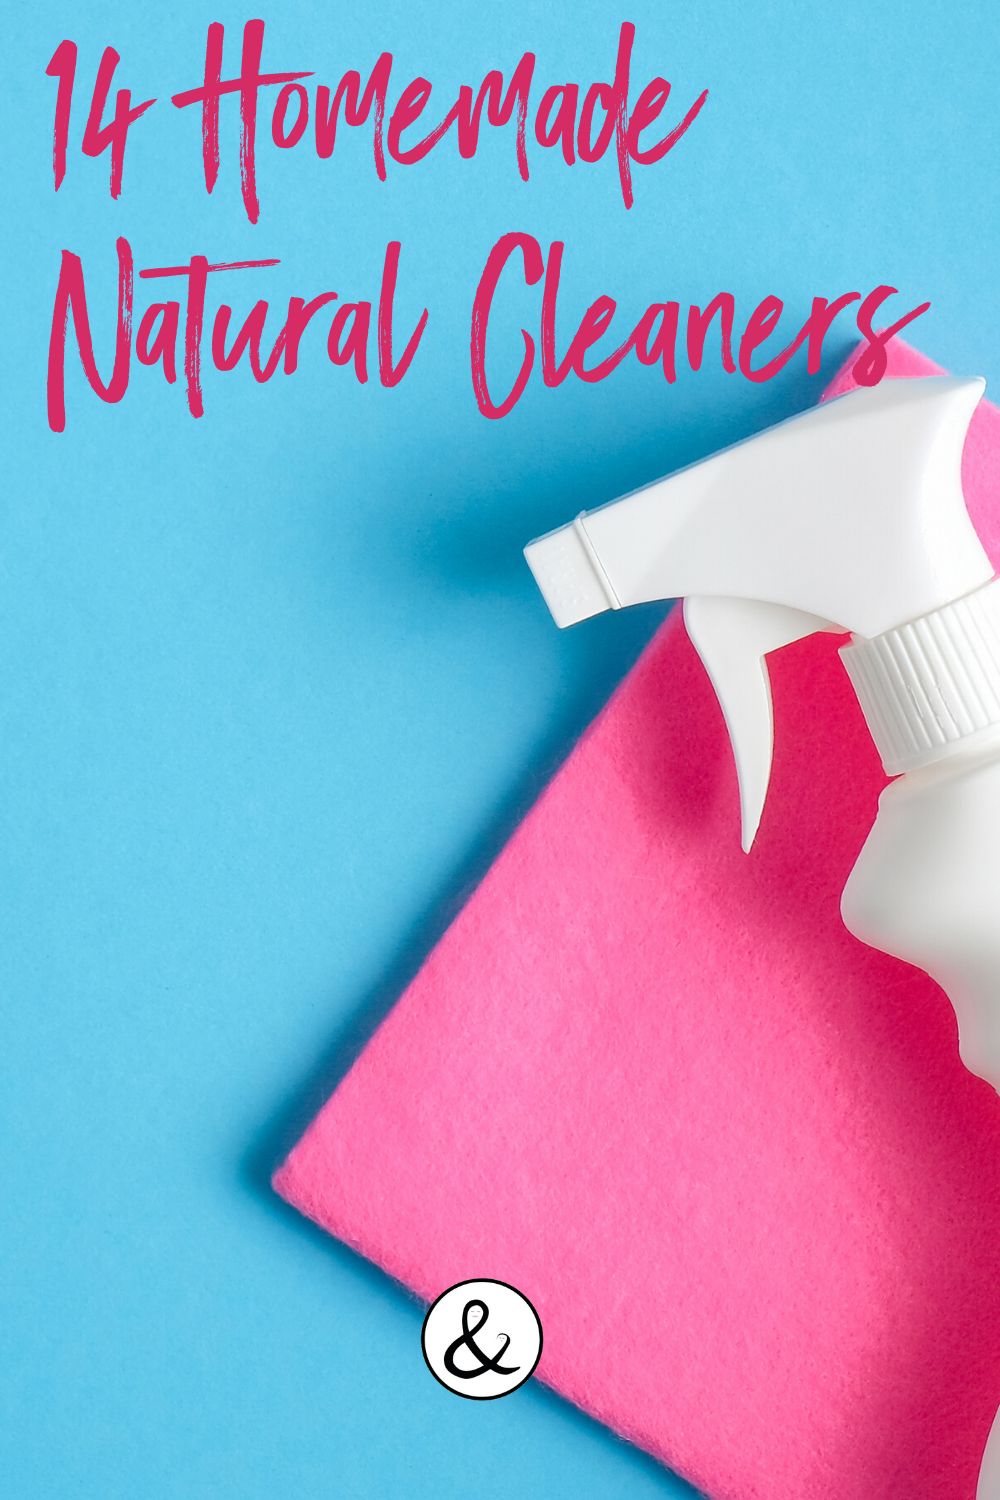 14 Homemade Natural Cleaners